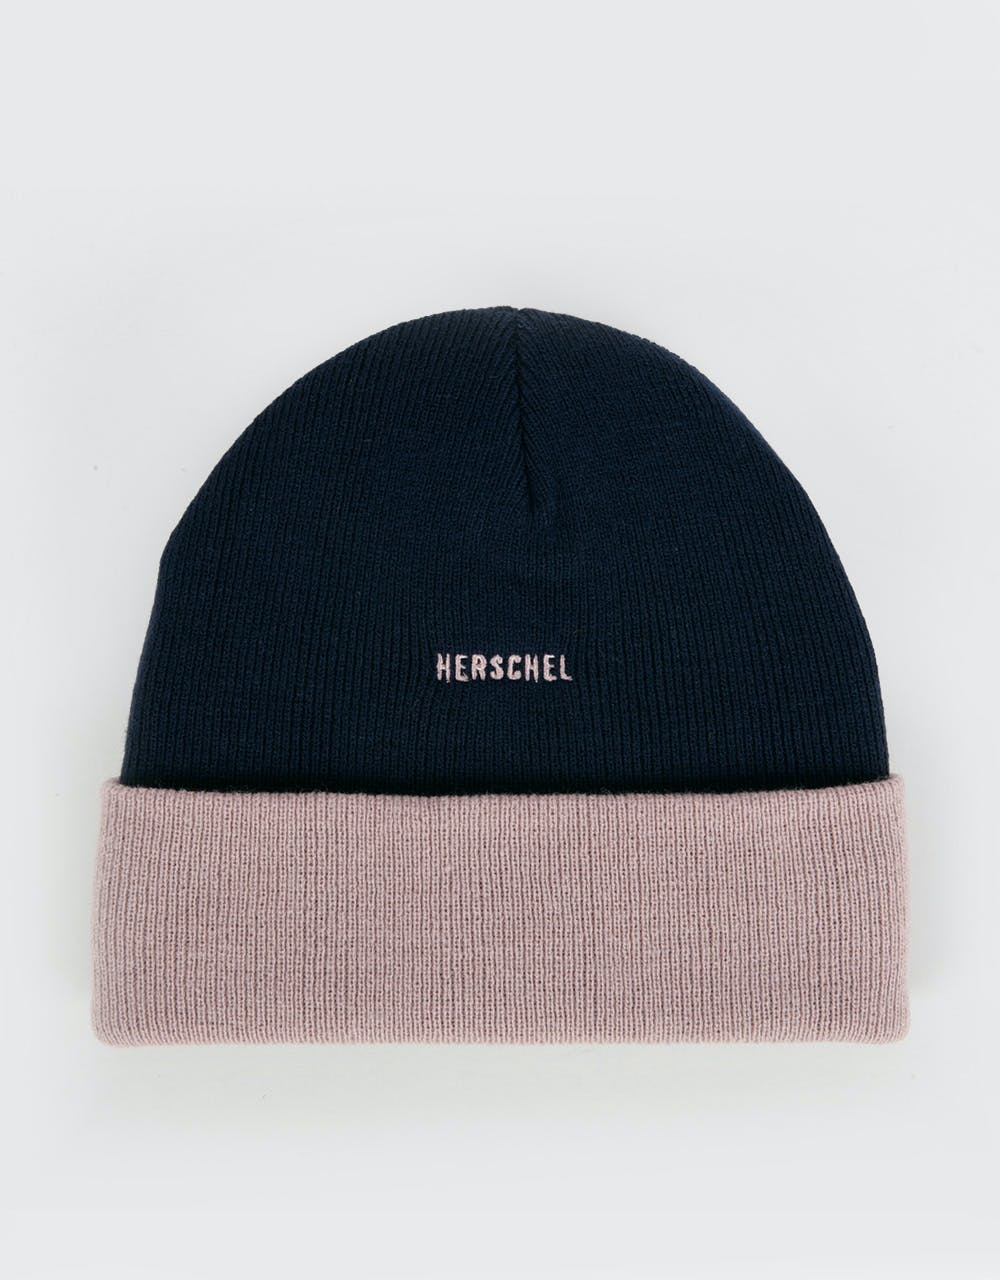 Herschel Supply Co. Rosewell Beanie - Peacoat/Ash Rose